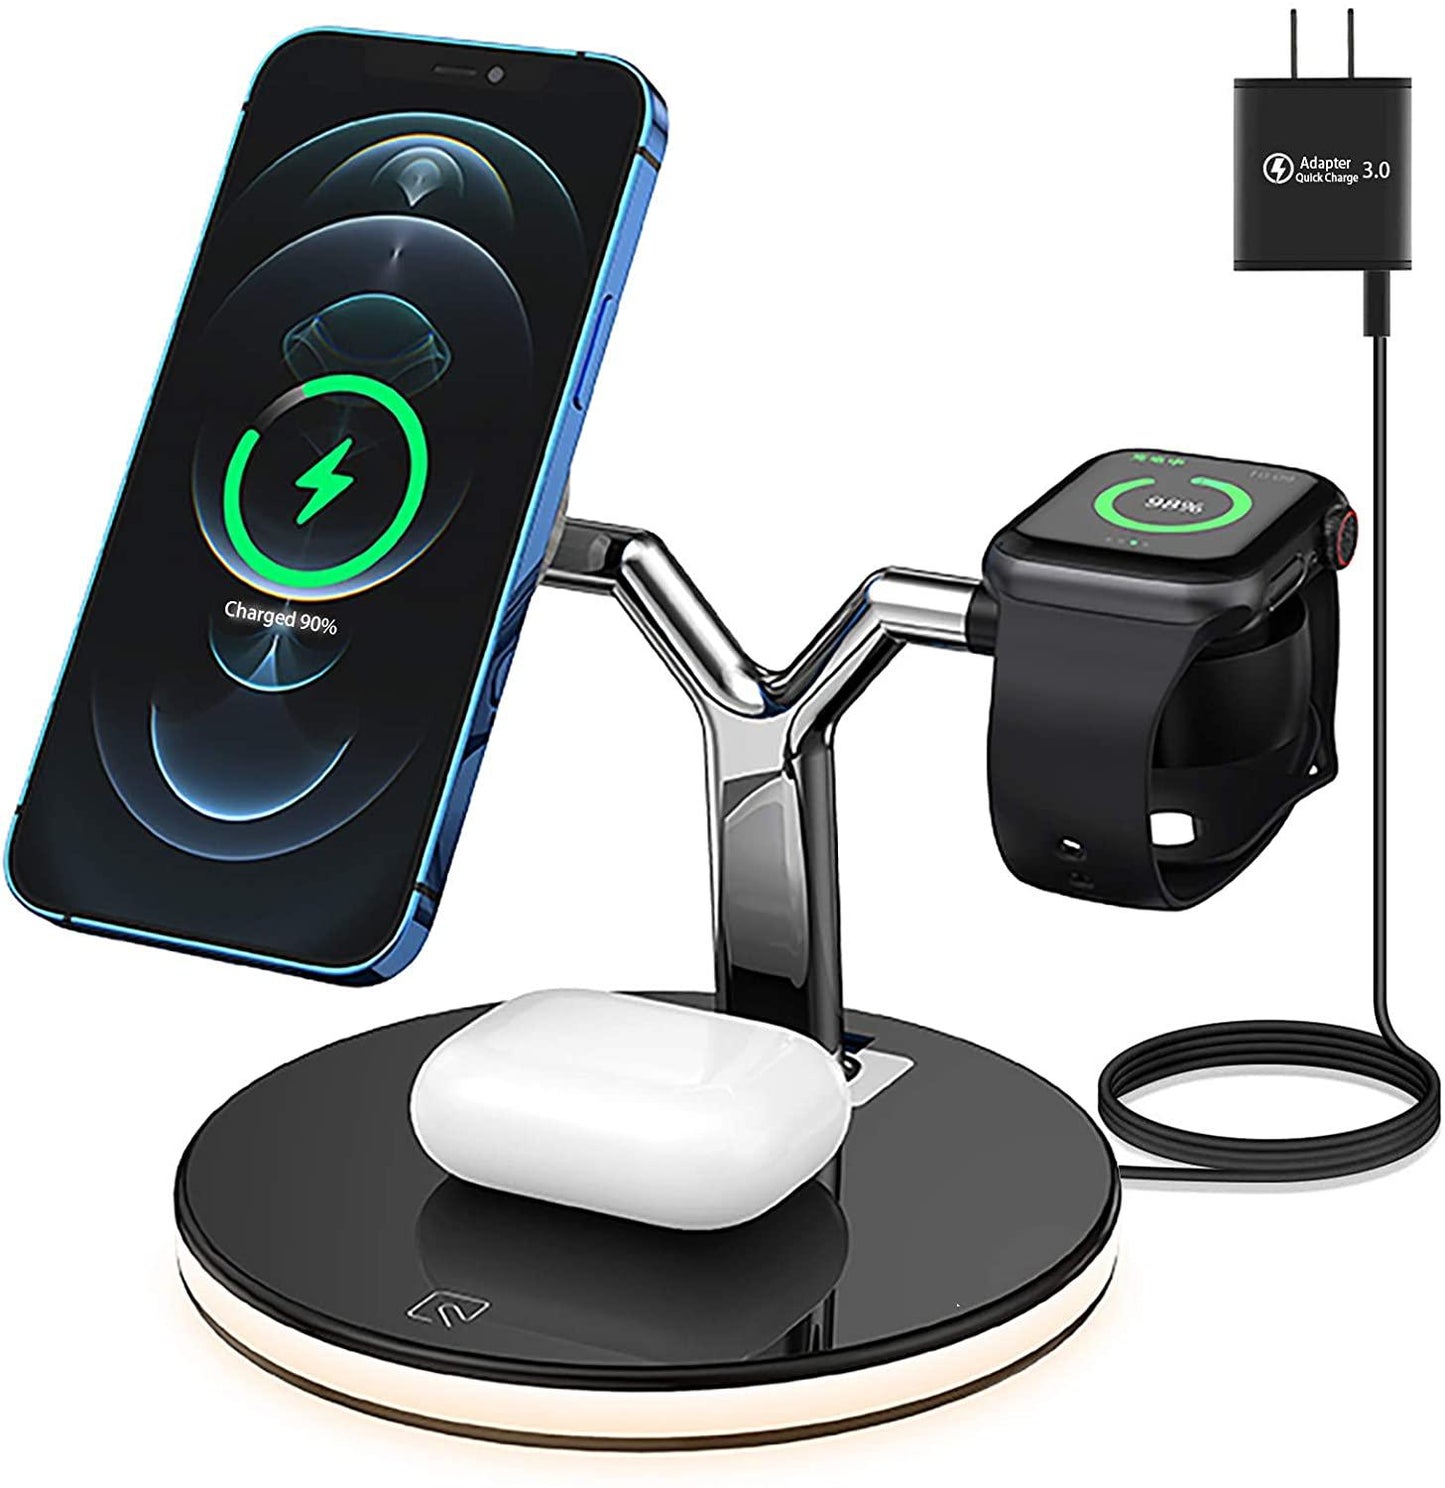 25W 3 in 1 Magnet Qi Fast Wireless Charger For Iphone 12 Mini Pro MAX Charging Station For Apple Watch 6 5 4 3 2 1 AirPods Pro